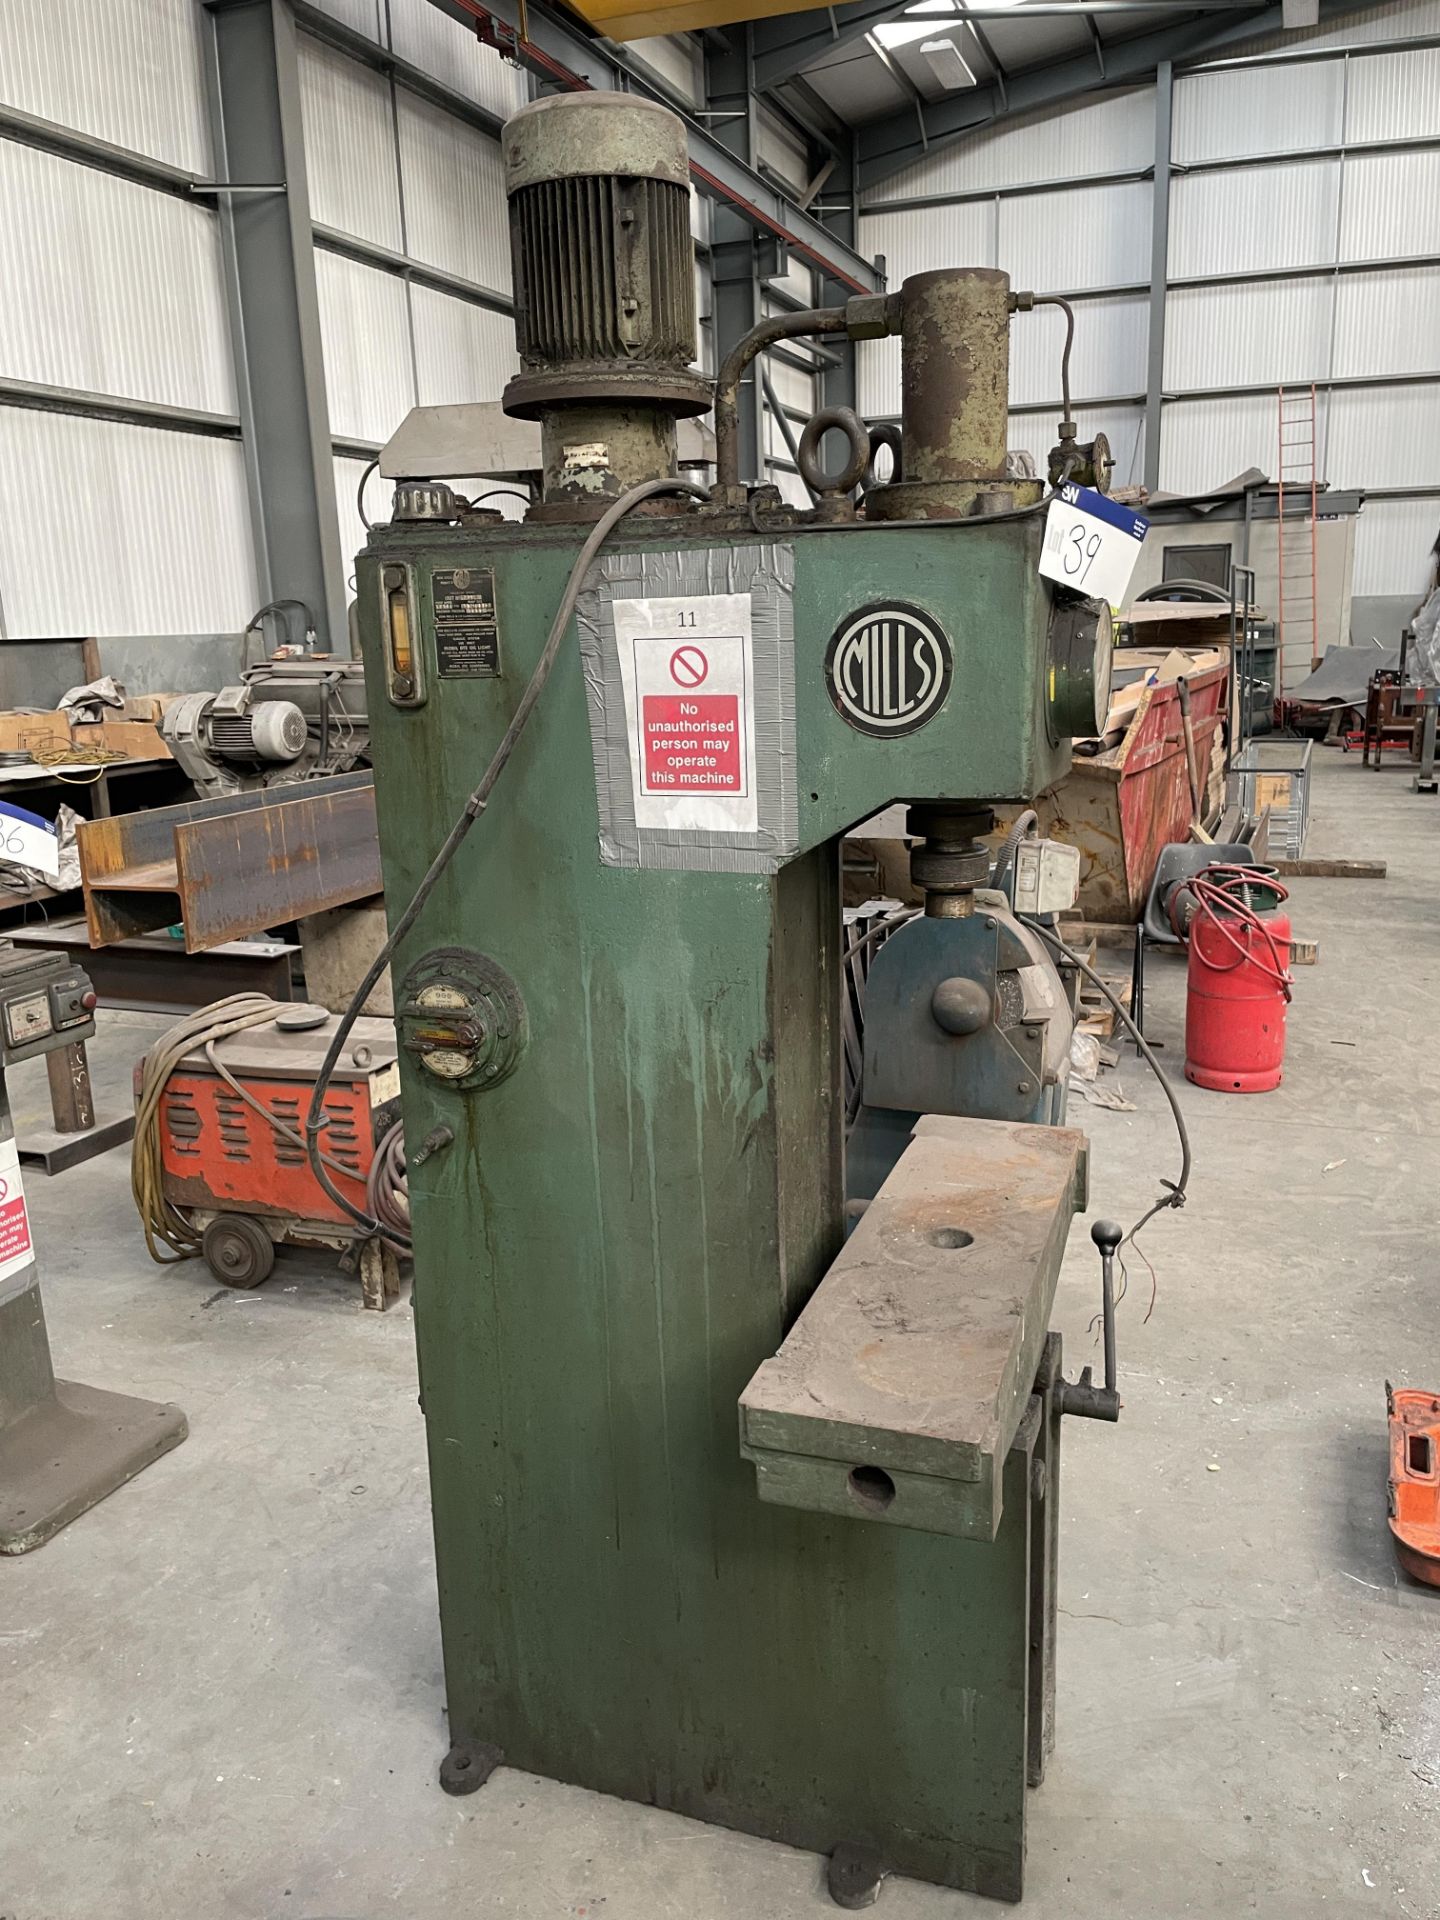 Mills Hydraulic Press, serial no. 52071, with table approx. 910mm x 250mm, lot located at Ocean - Bild 2 aus 4